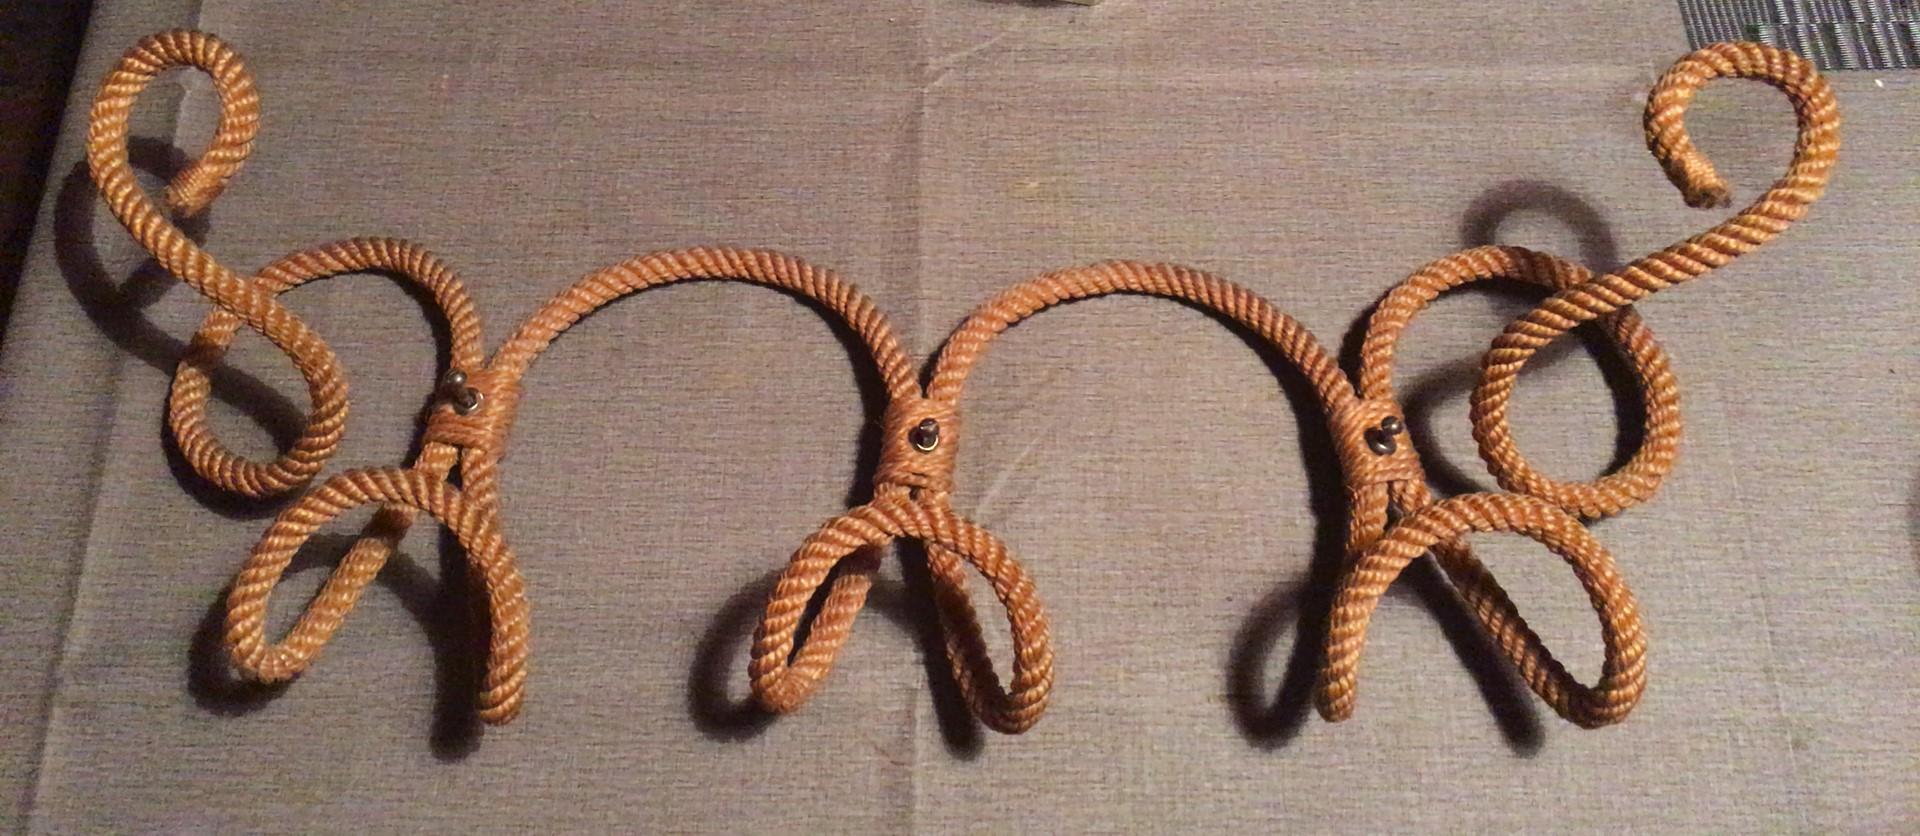 Large rope coat rack Audoux-Minet, circa 1960.
Nautical style.
Measures: Length / 25.5 inches.
Height / 8 inches.